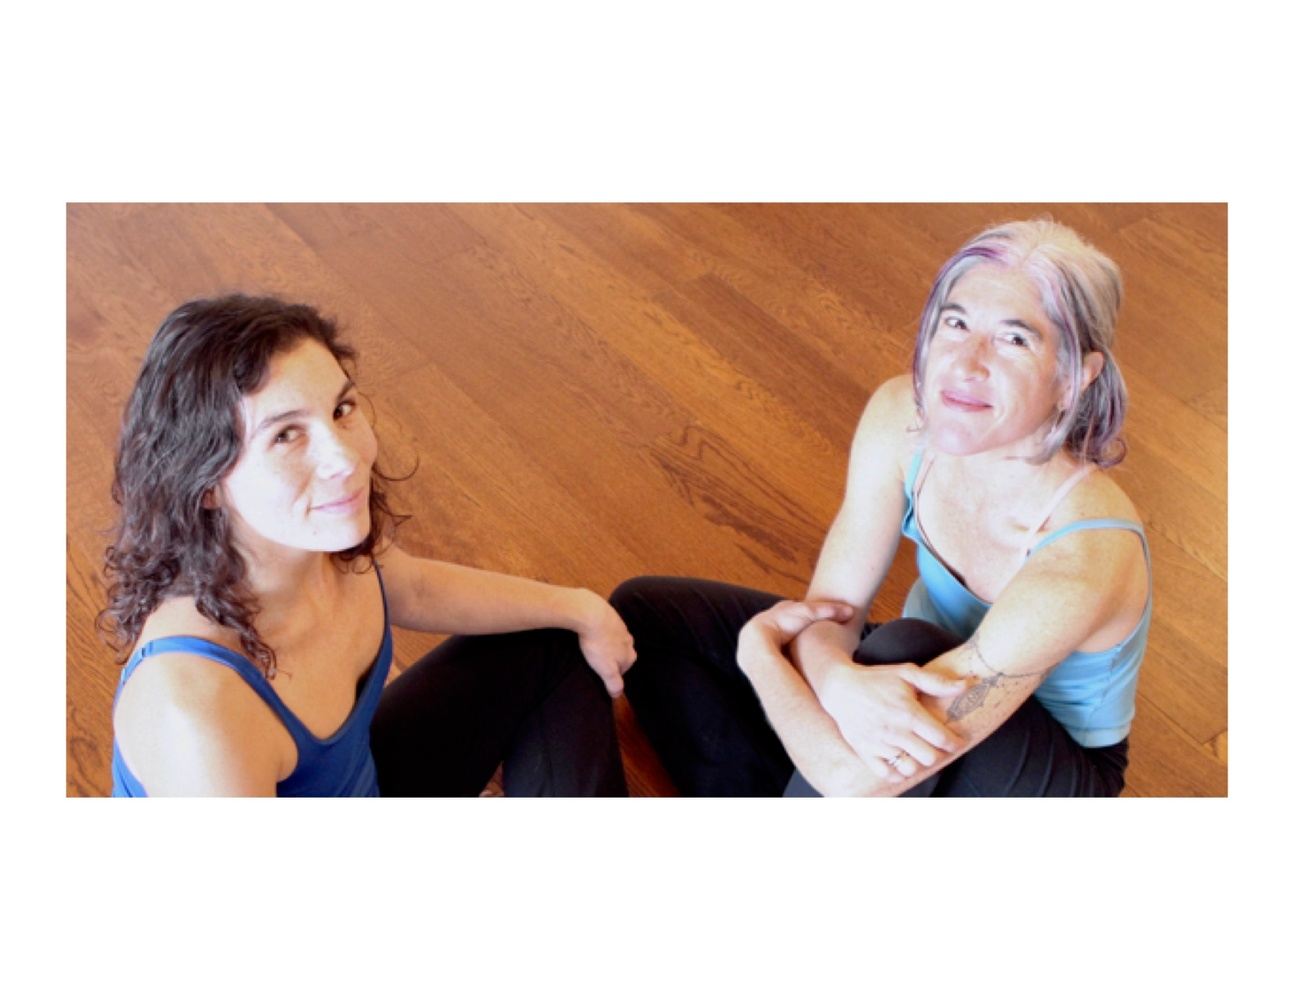 Con-Sensual Yoga Workshop: A partner and group yoga exploration